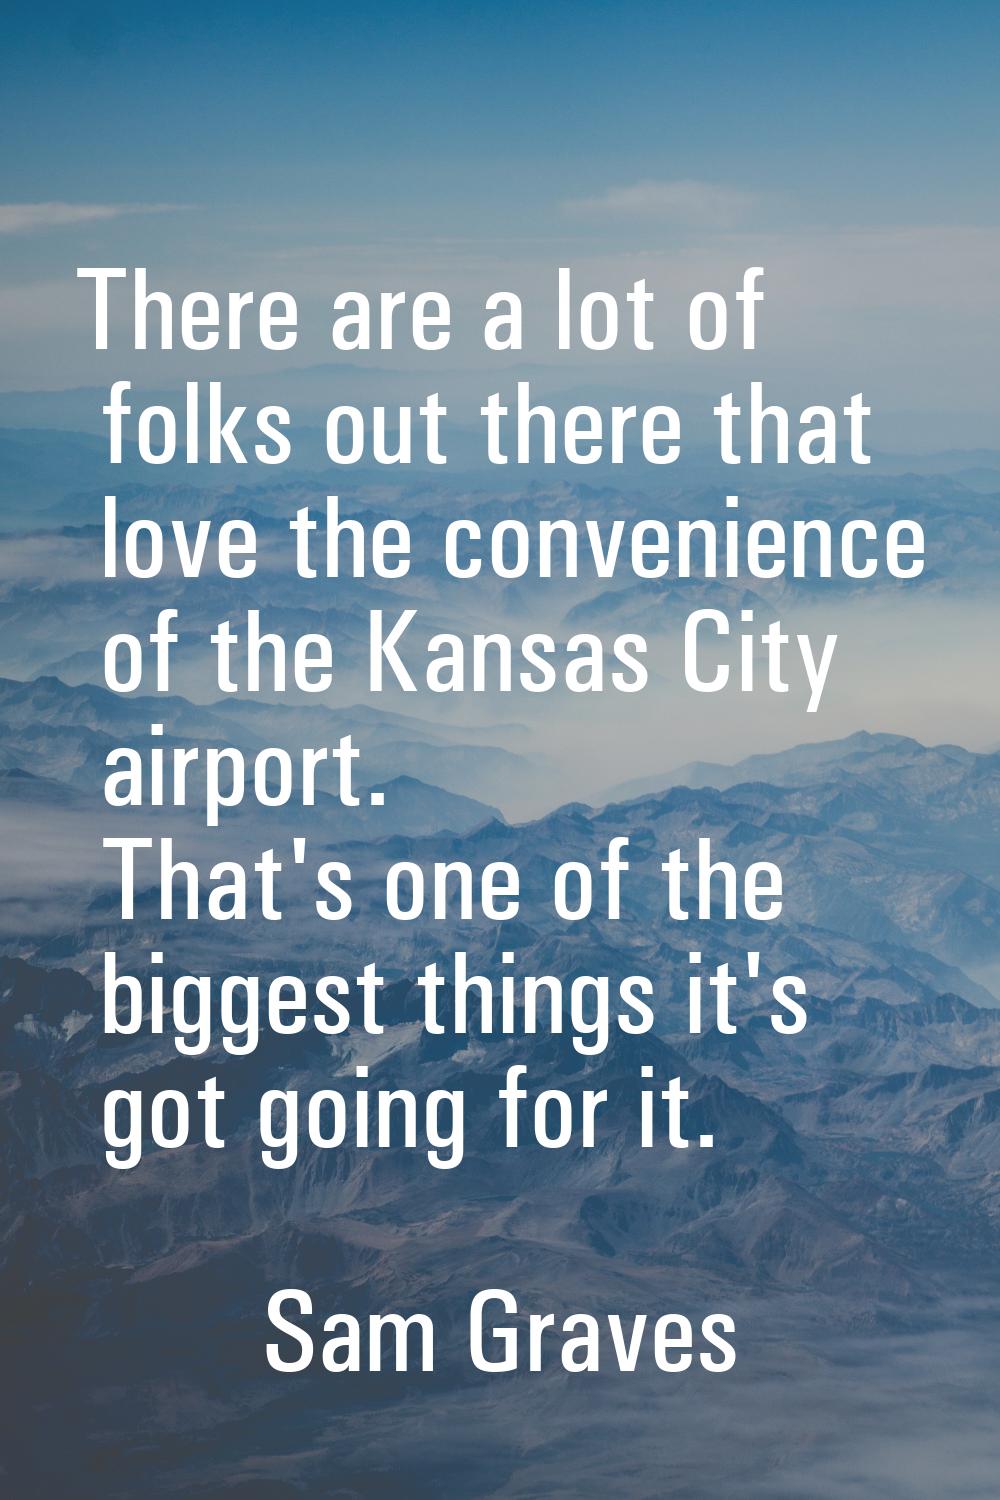 There are a lot of folks out there that love the convenience of the Kansas City airport. That's one